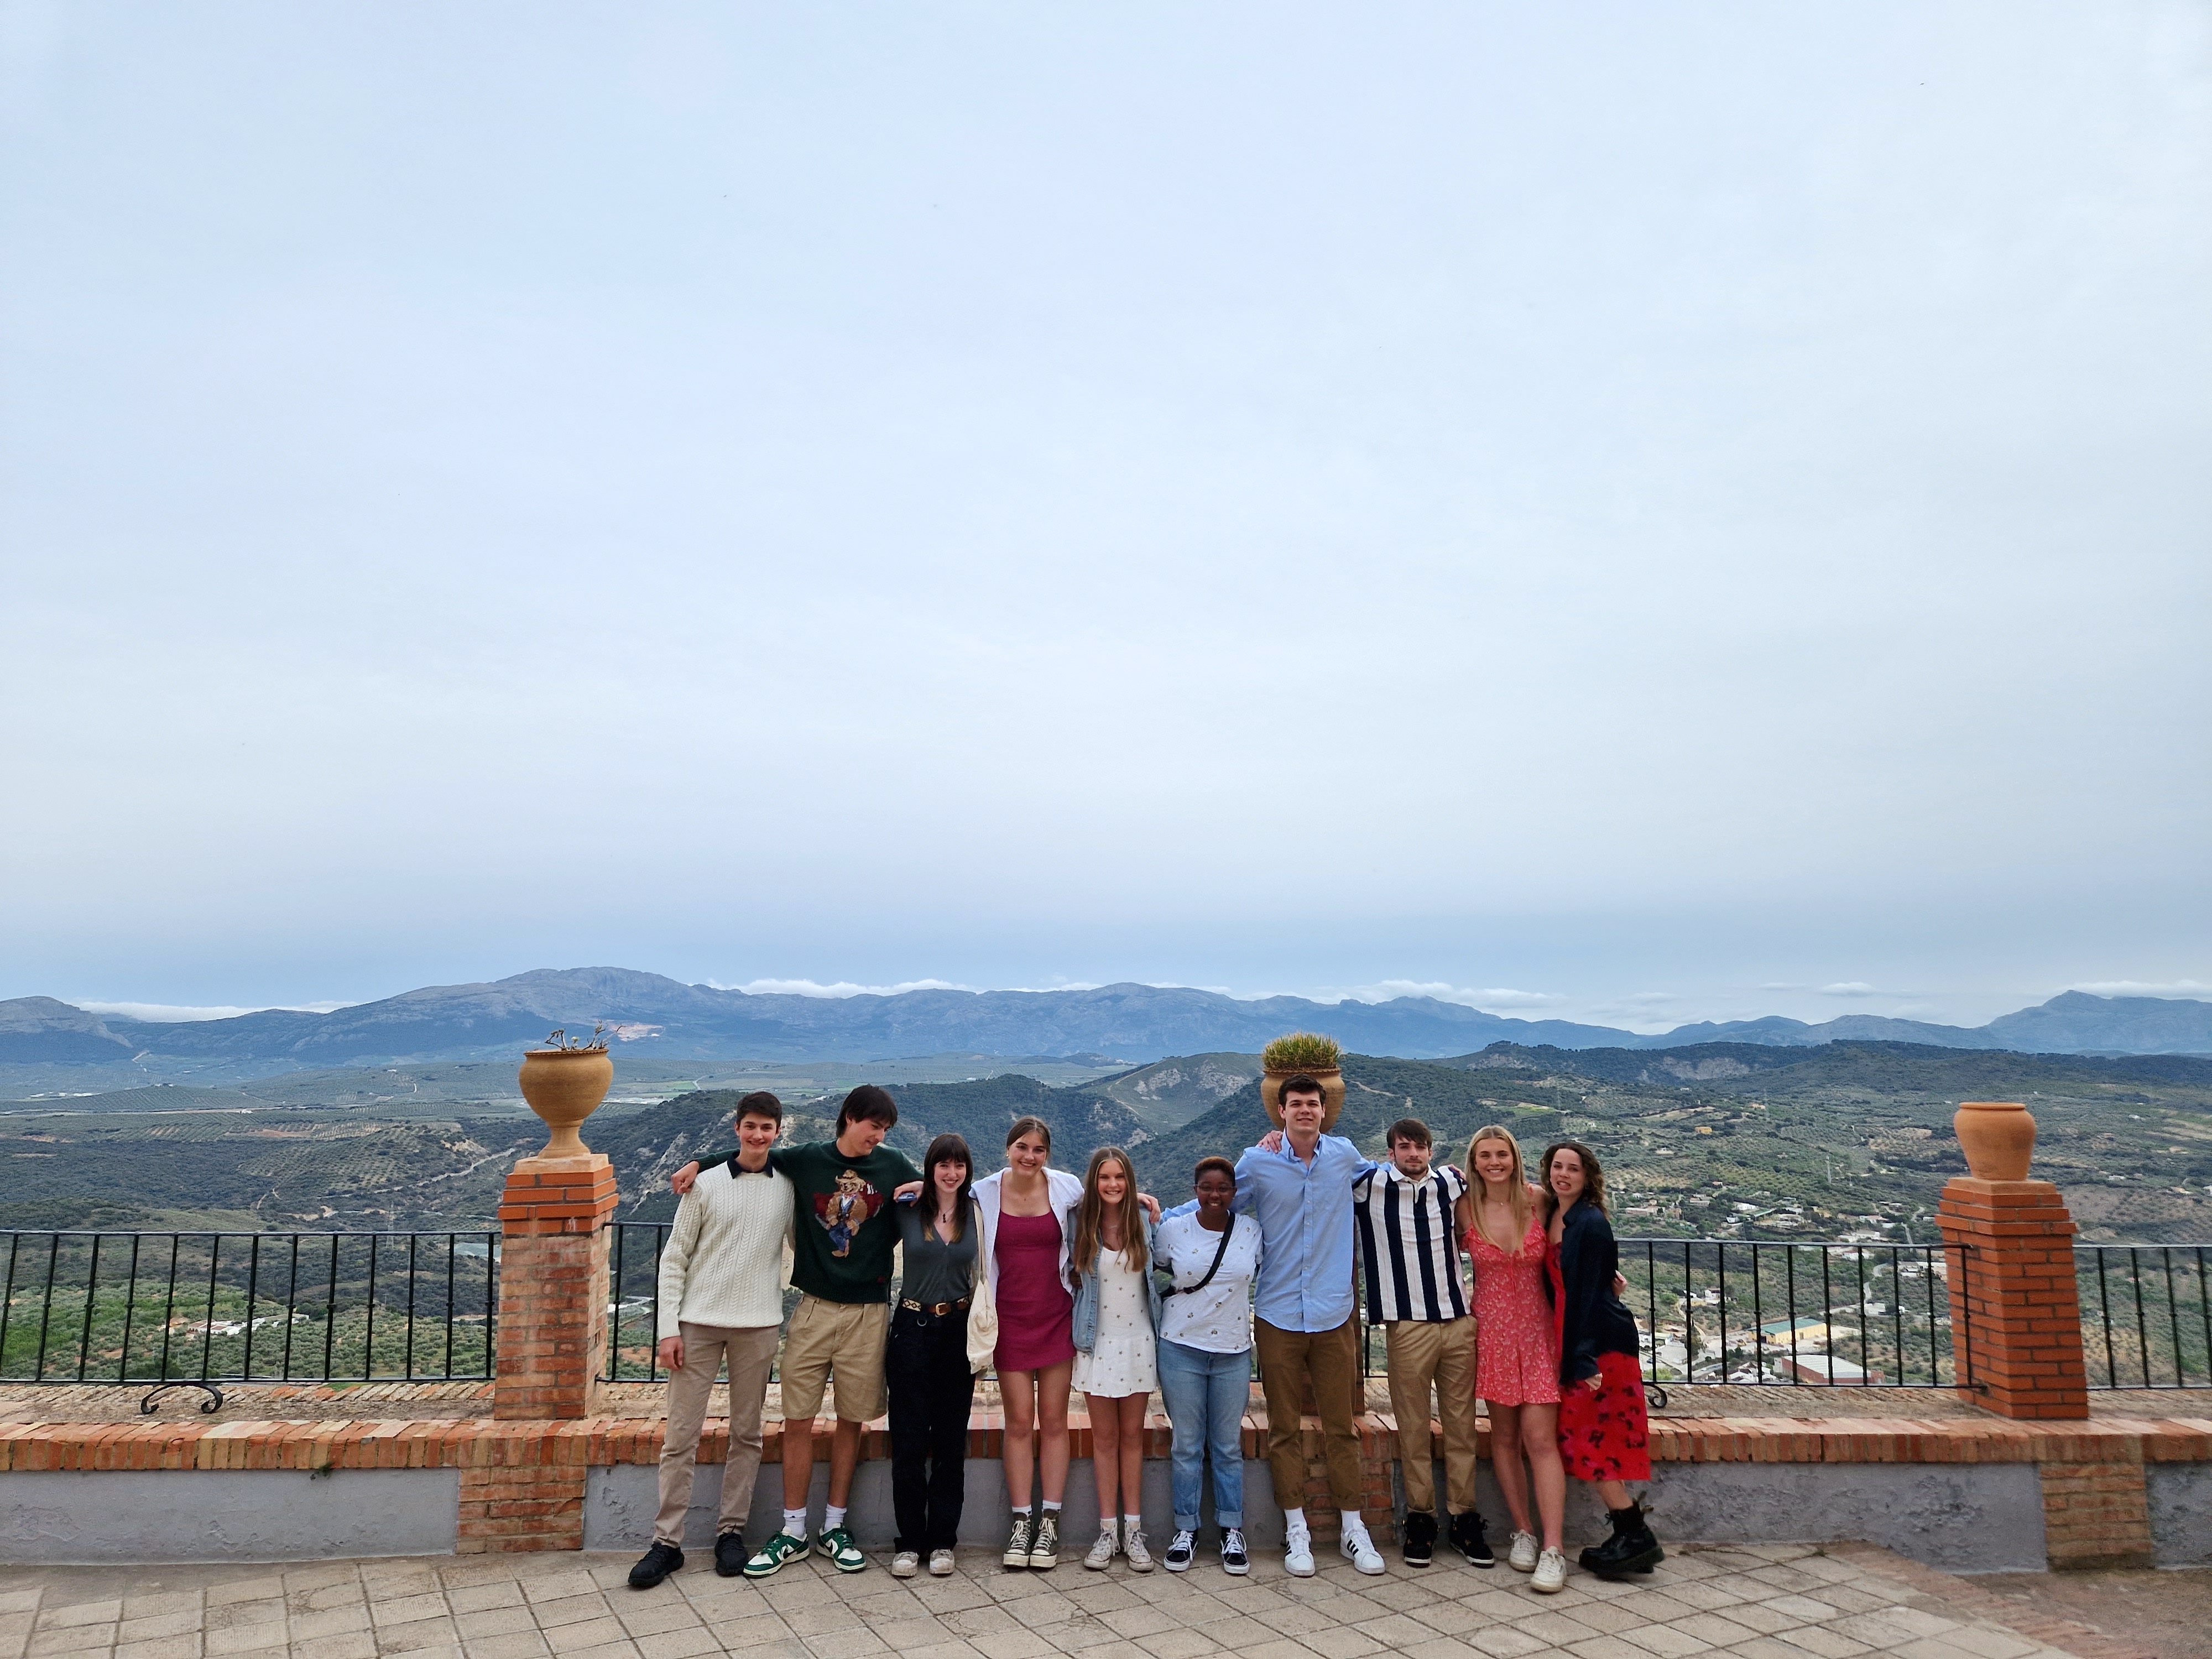 Proctor Academy experiential learning about history in Spain through travel